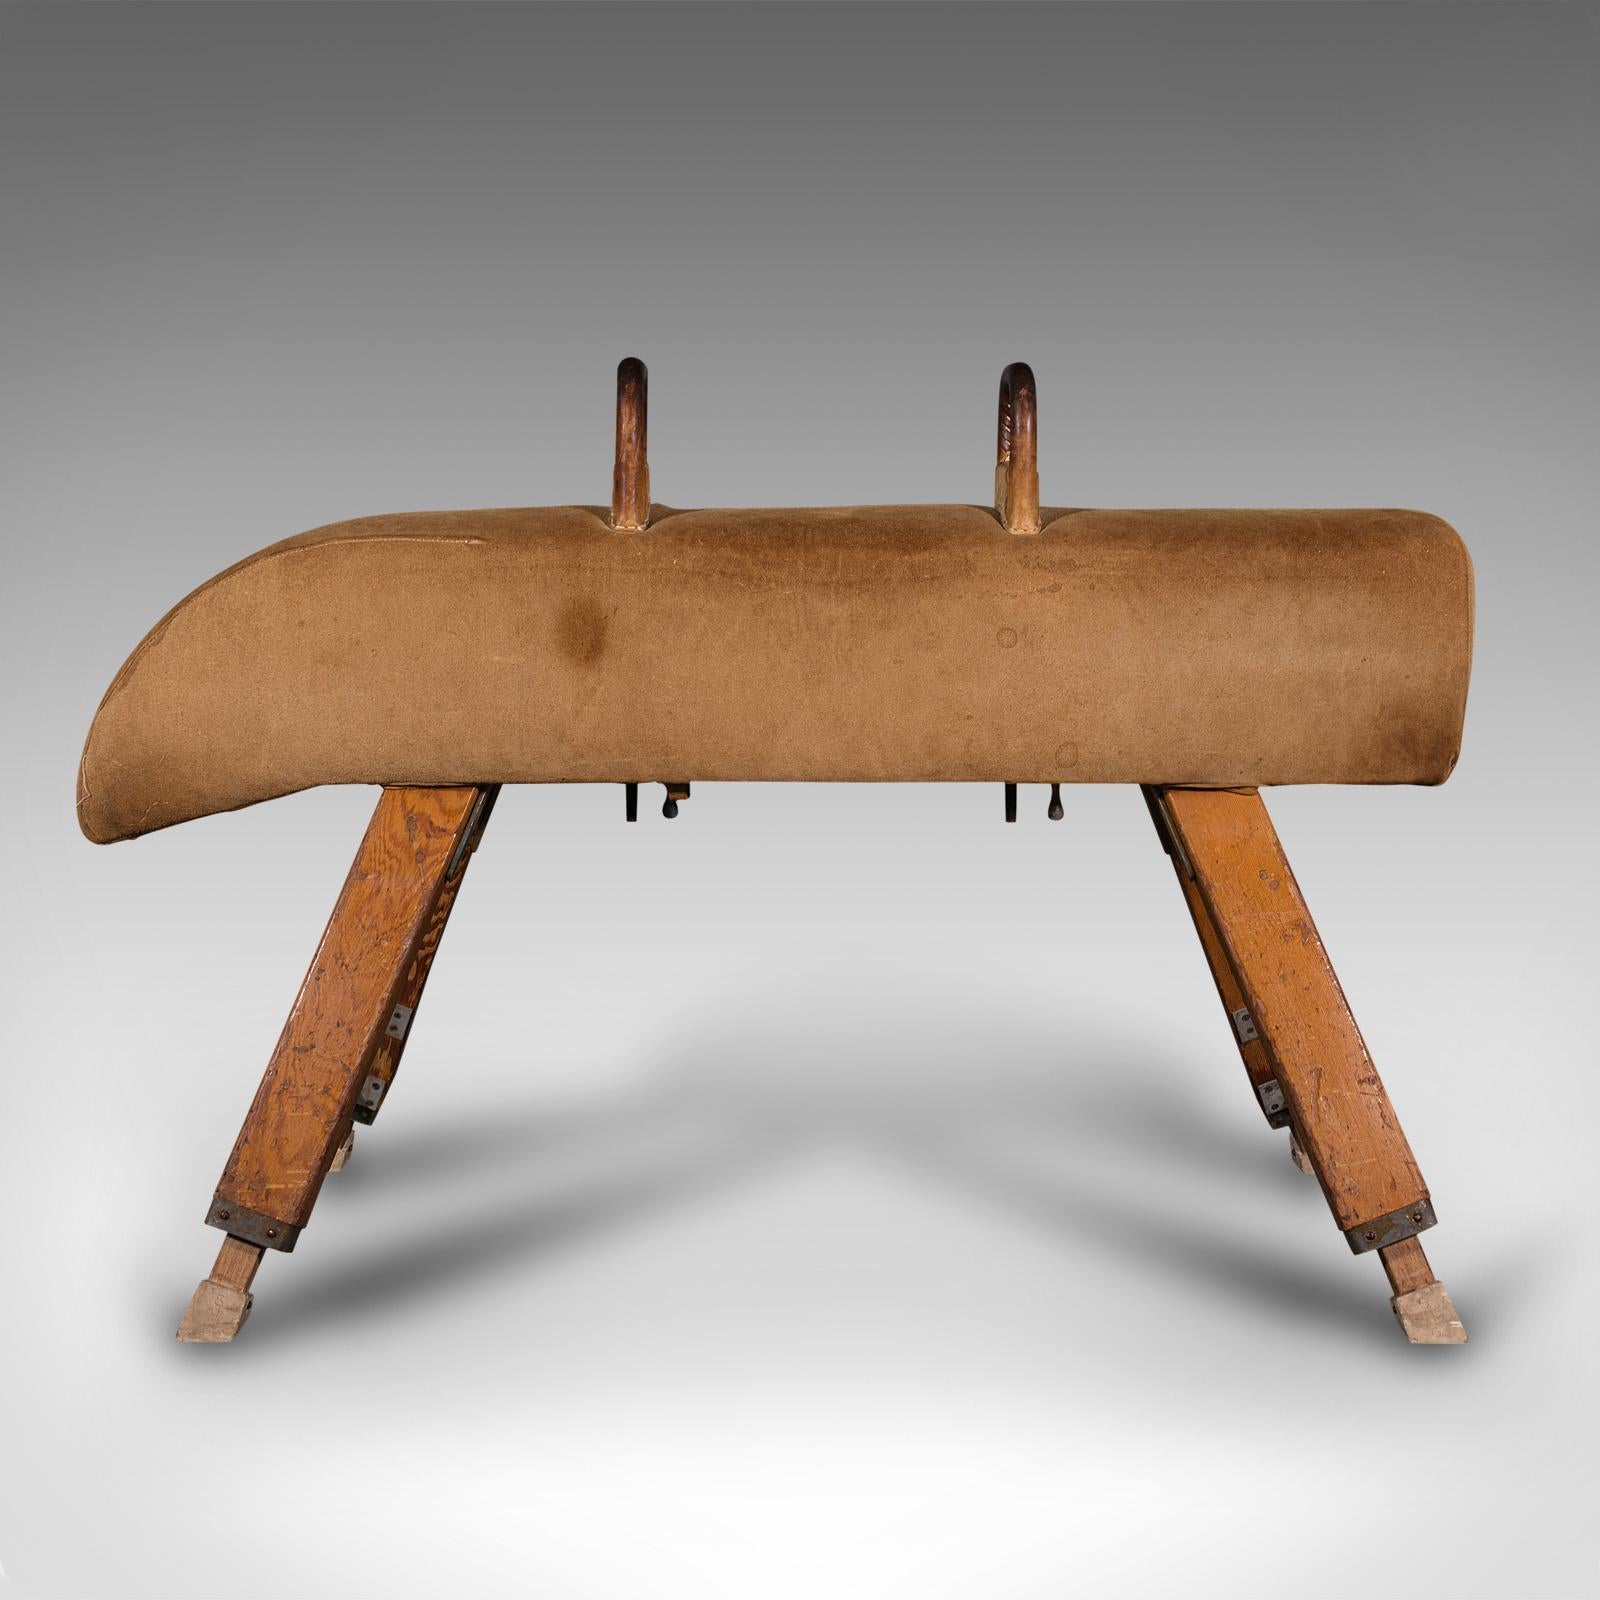 This is a vintage gymnastic pommel horse. An English, suede and pine athletic vaulting apparatus, dating to the mid 20th century, circa 1960.

Supremely solid vaulting horse, ideal for continued use today
Displays a desirable aged patina with